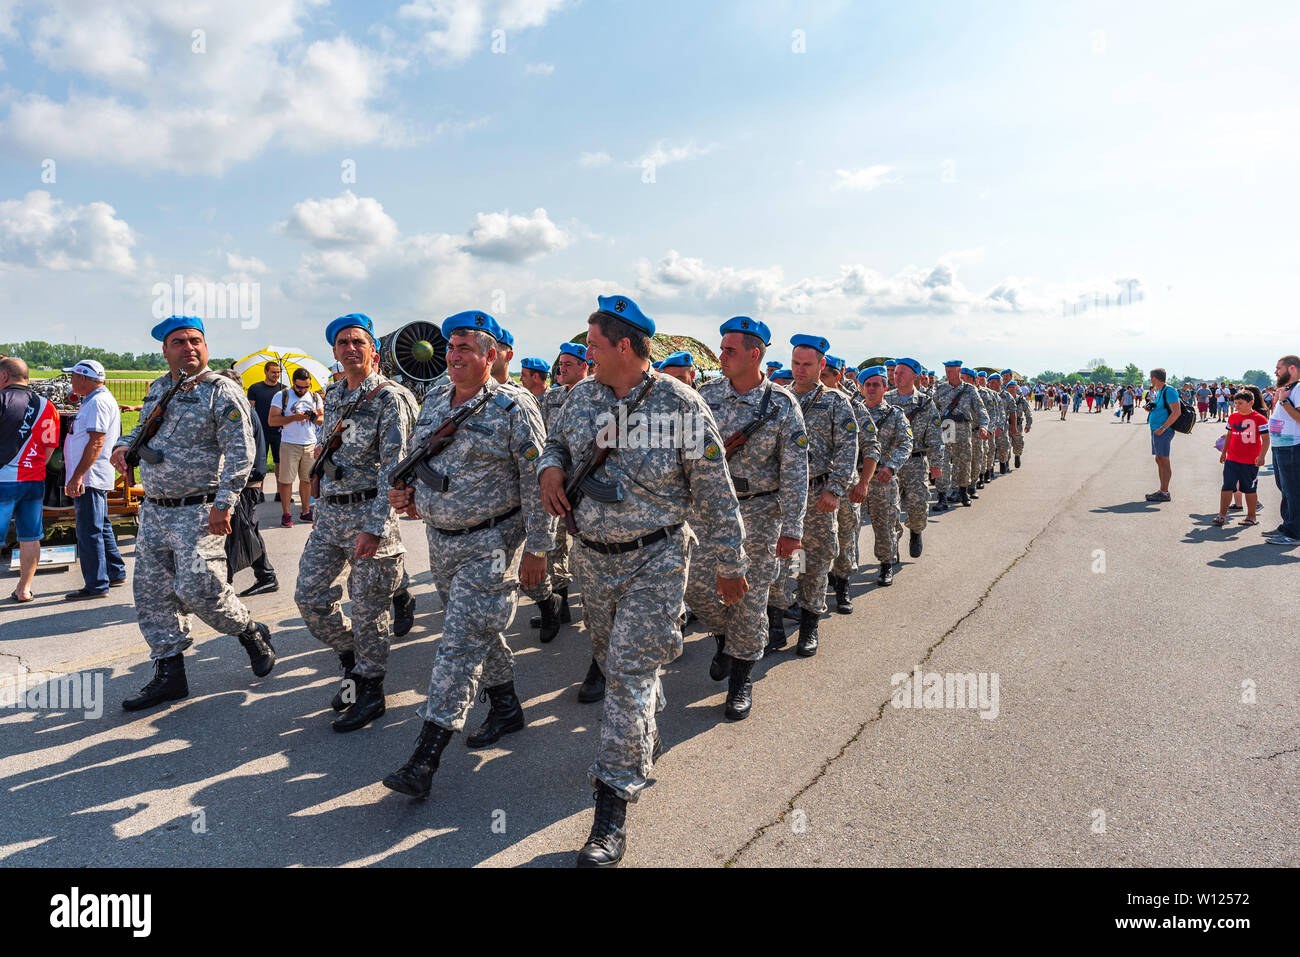 GRAF IGNATIEVO, BULGARIA - JUNE 29 2019: Parade of soldiers from Bulgarian army during pen day for visiting with military equipment exposition and fly Stock Photo